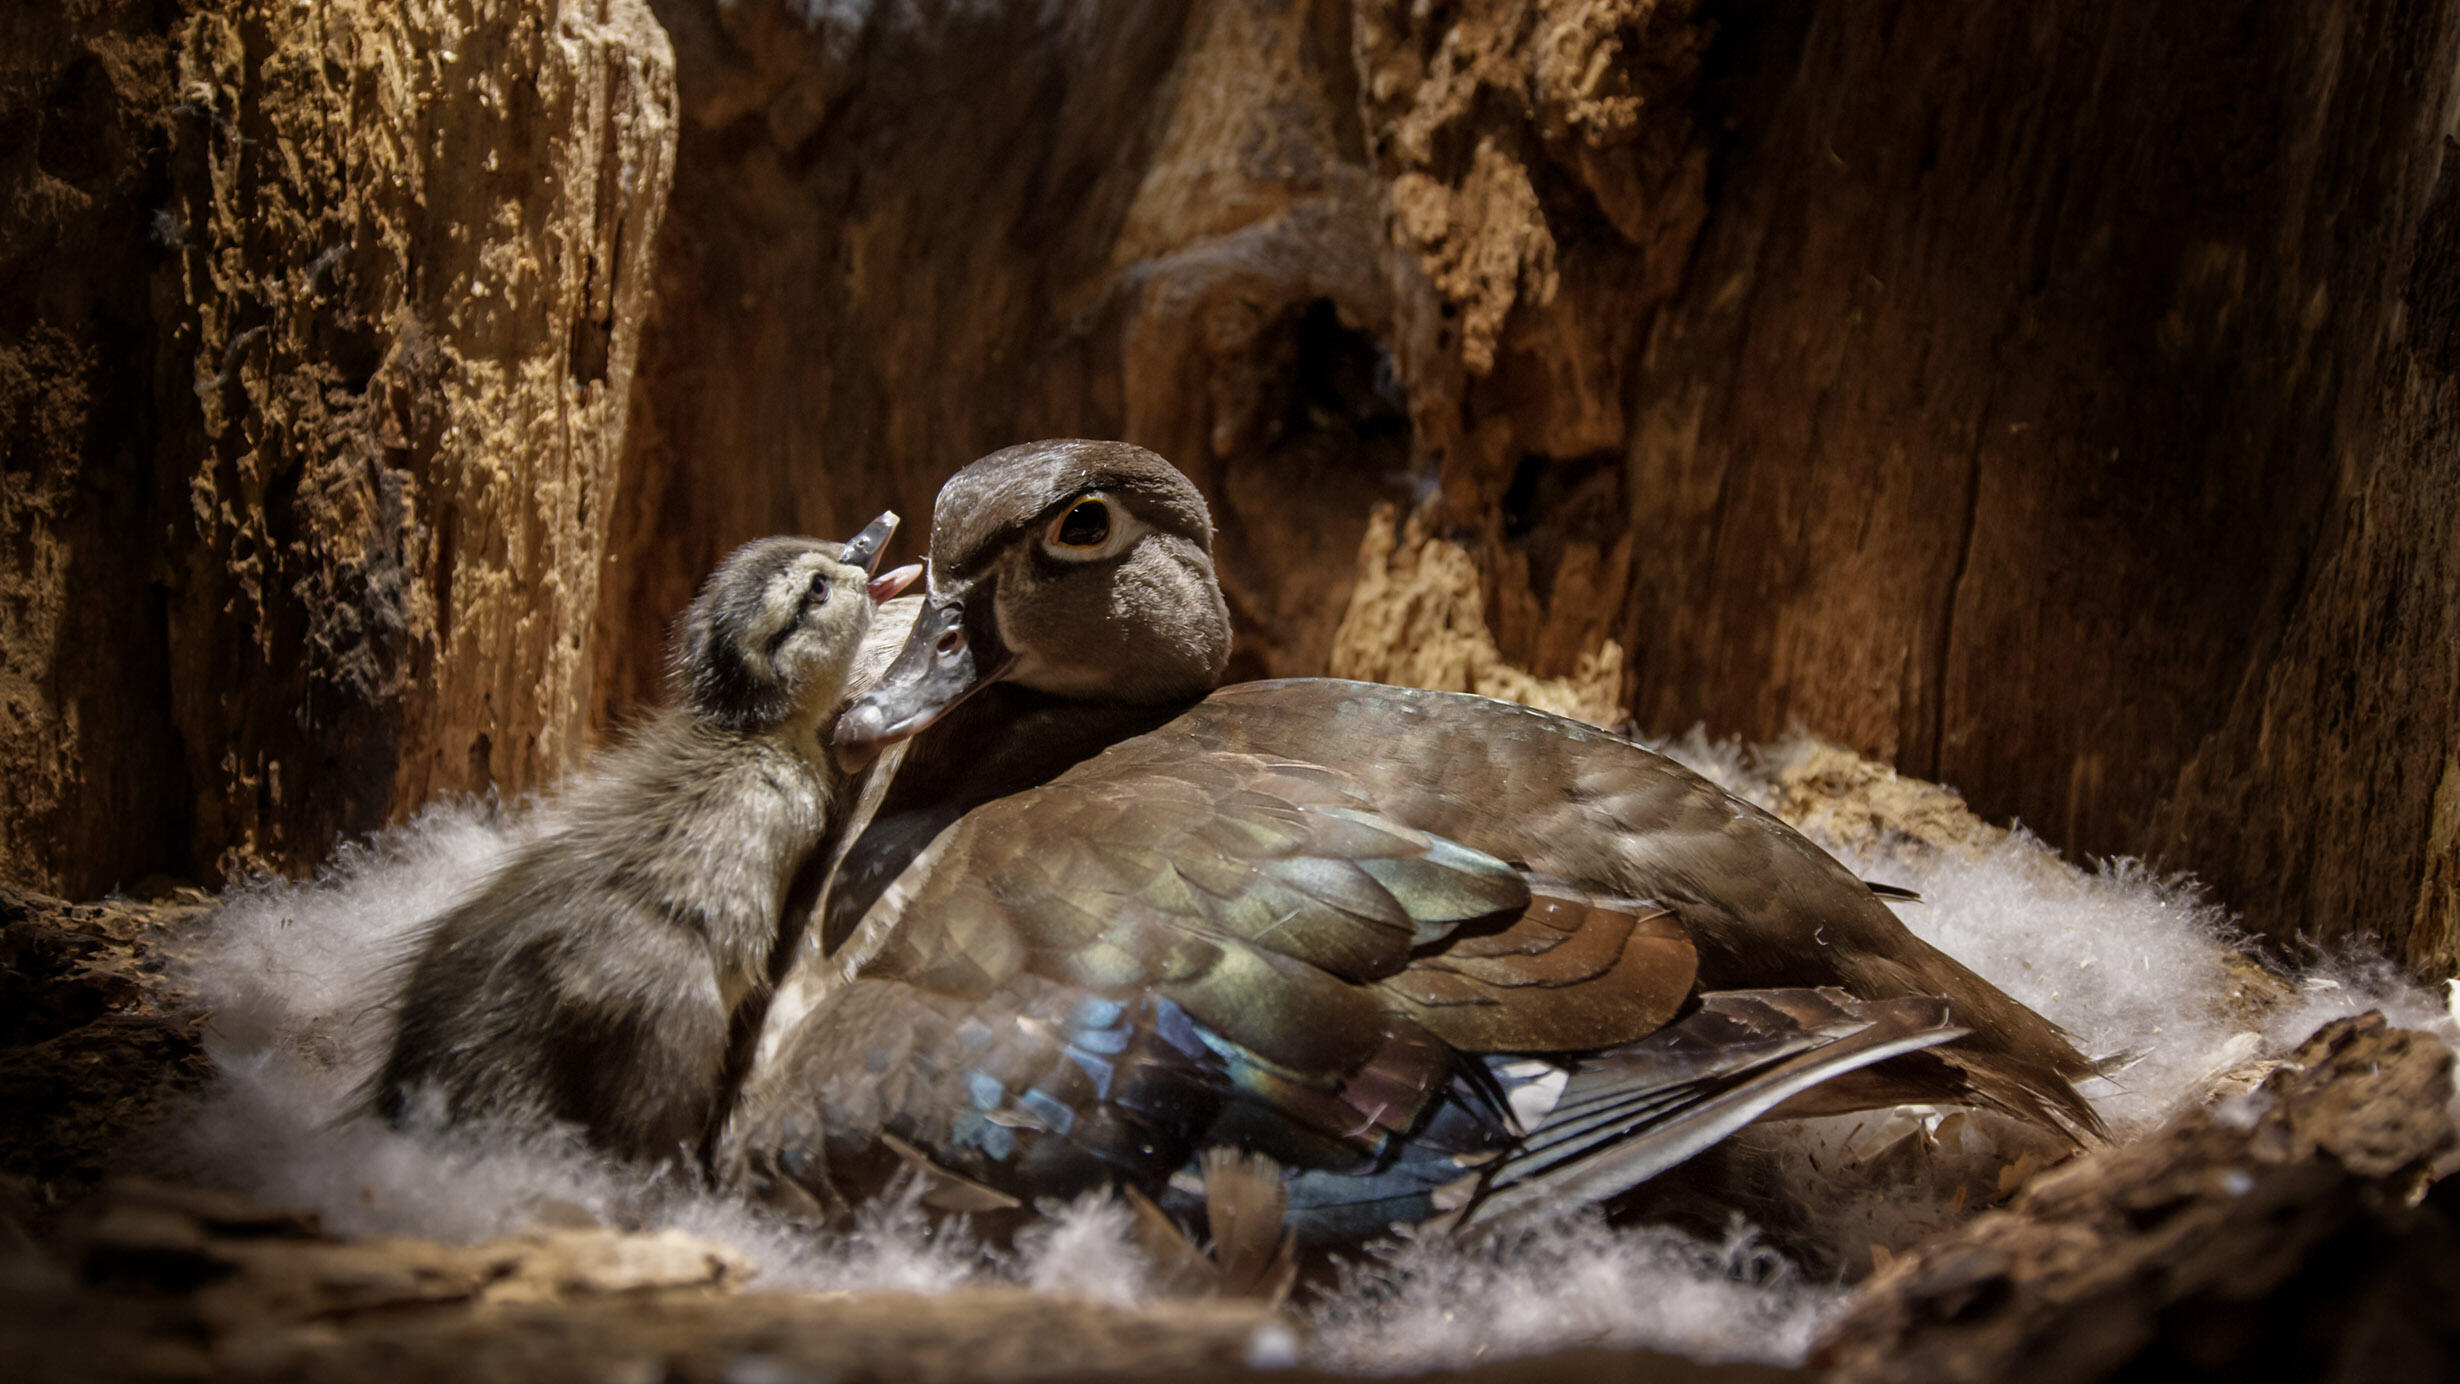 Wood duck and duckling in nest.